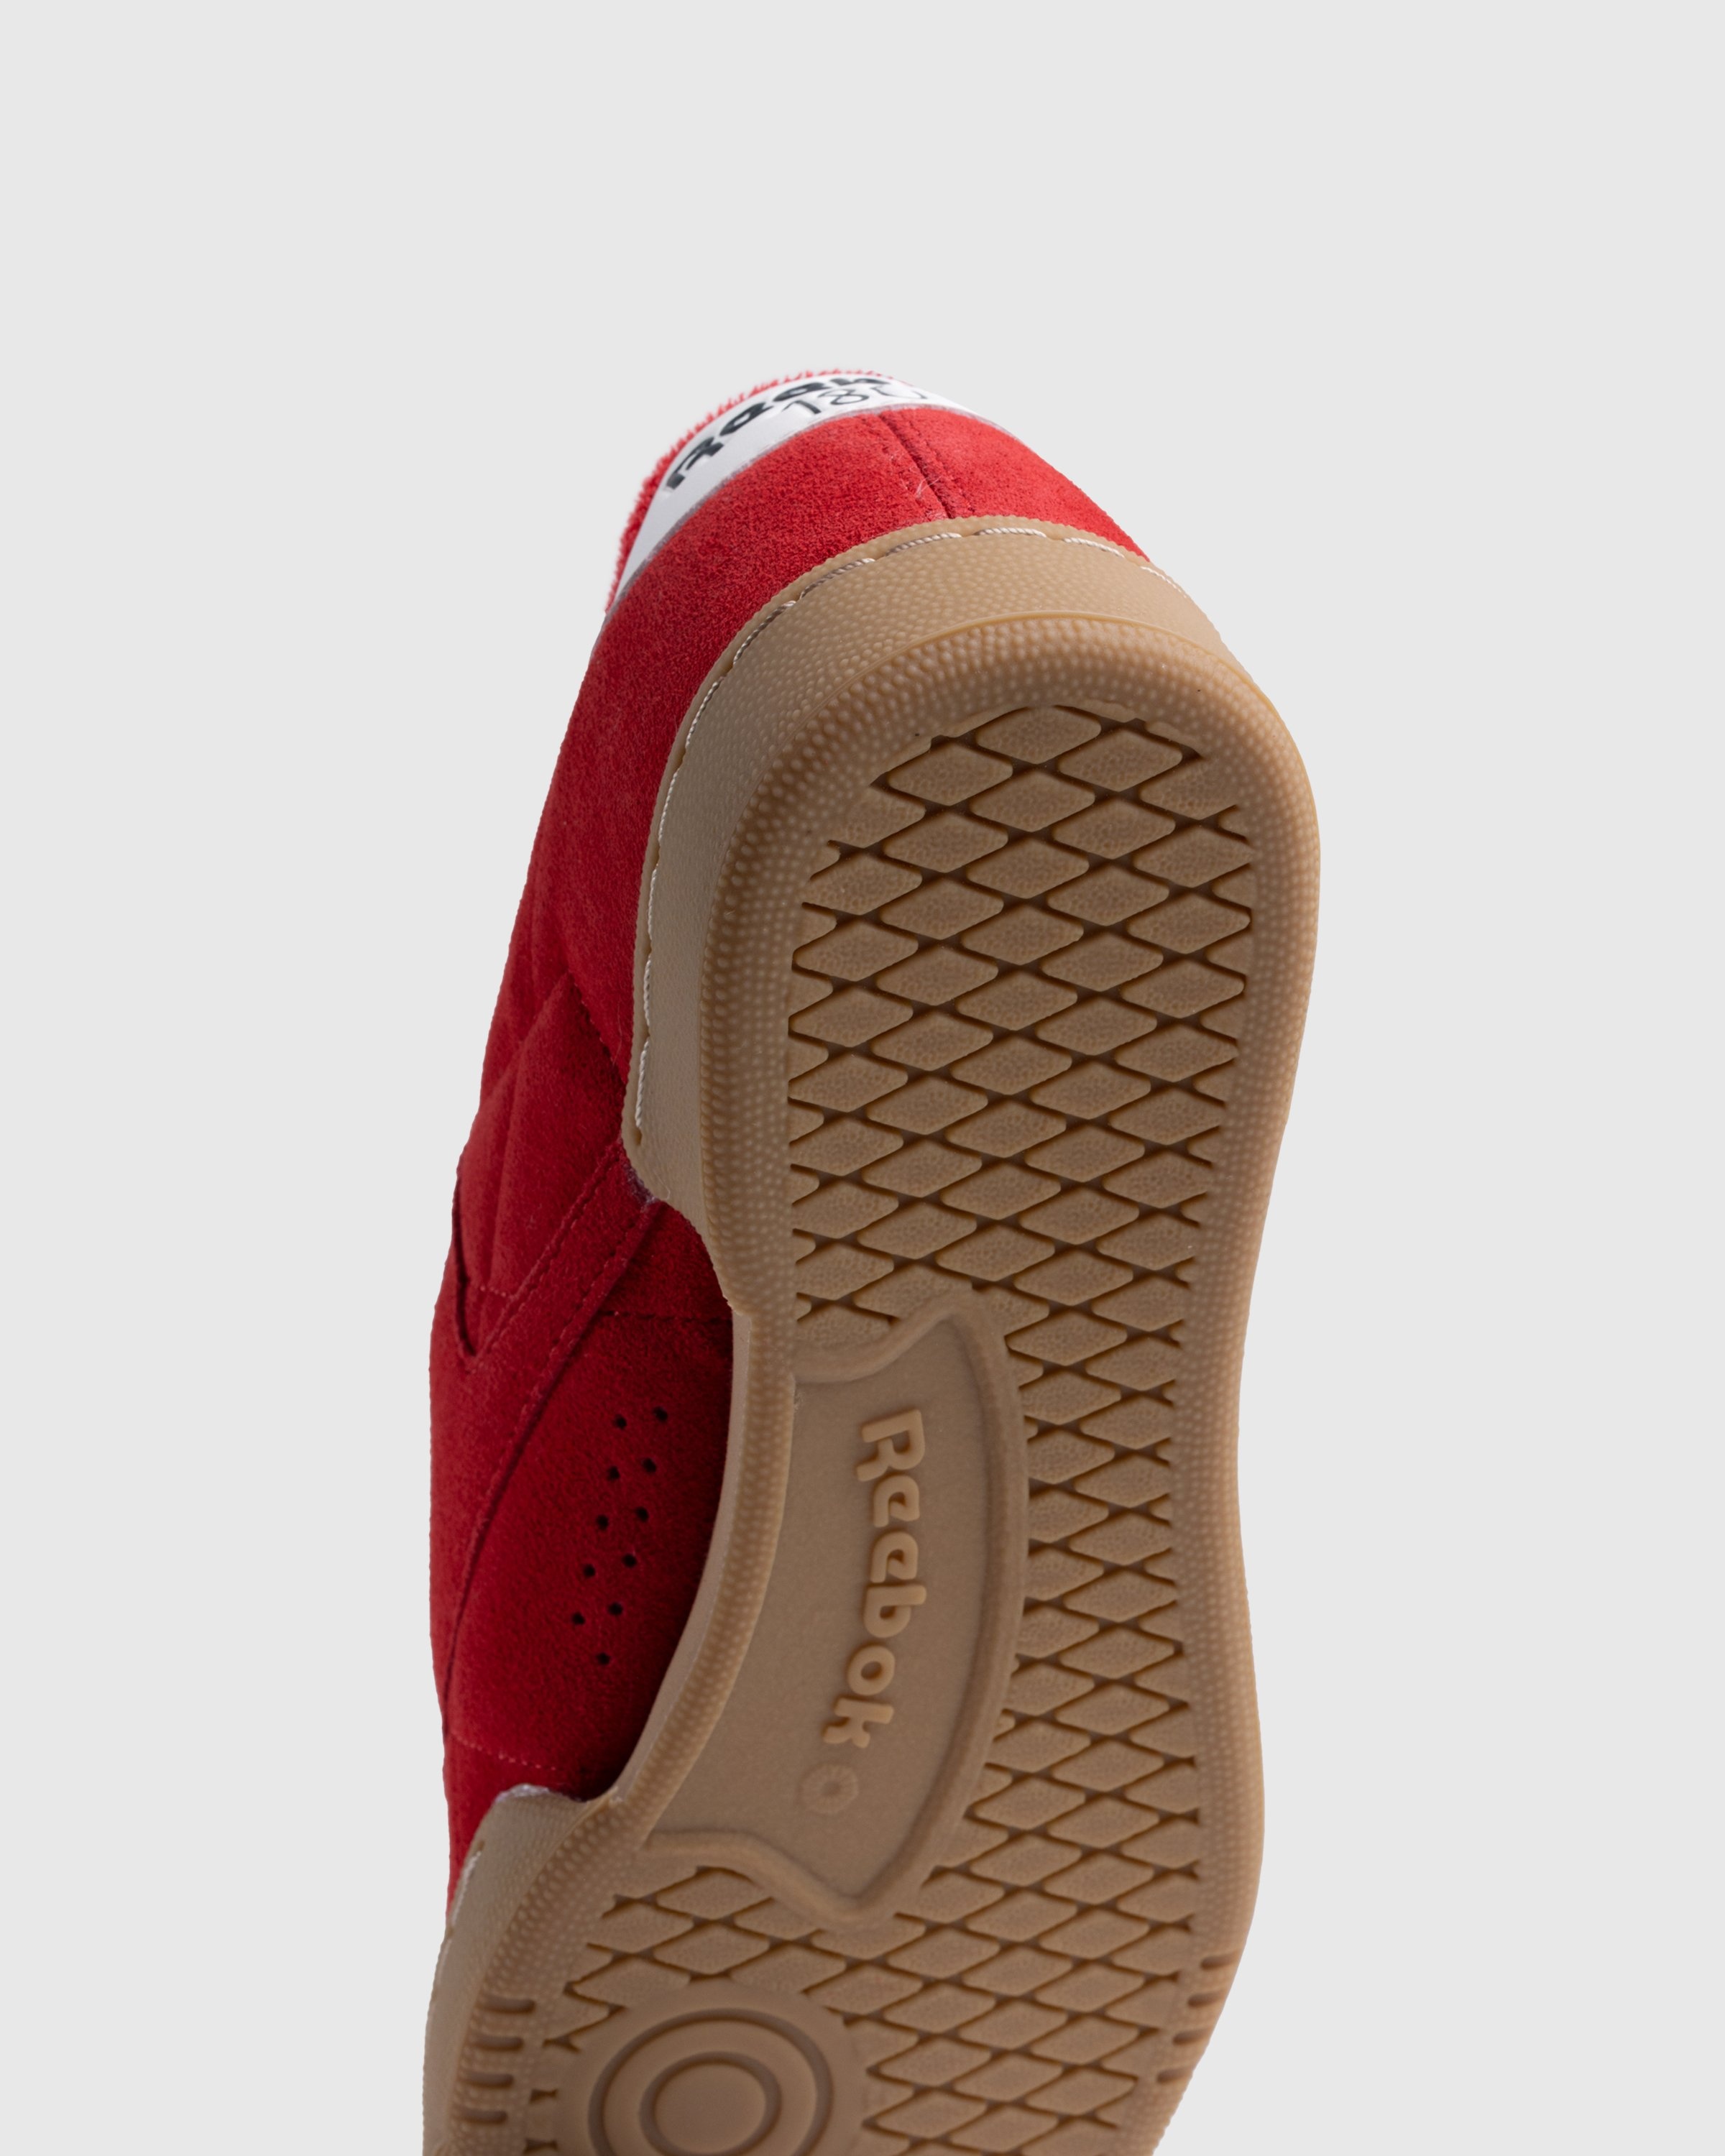 Reebok – Club C Grounds Red - Sneakers - Red - Image 6